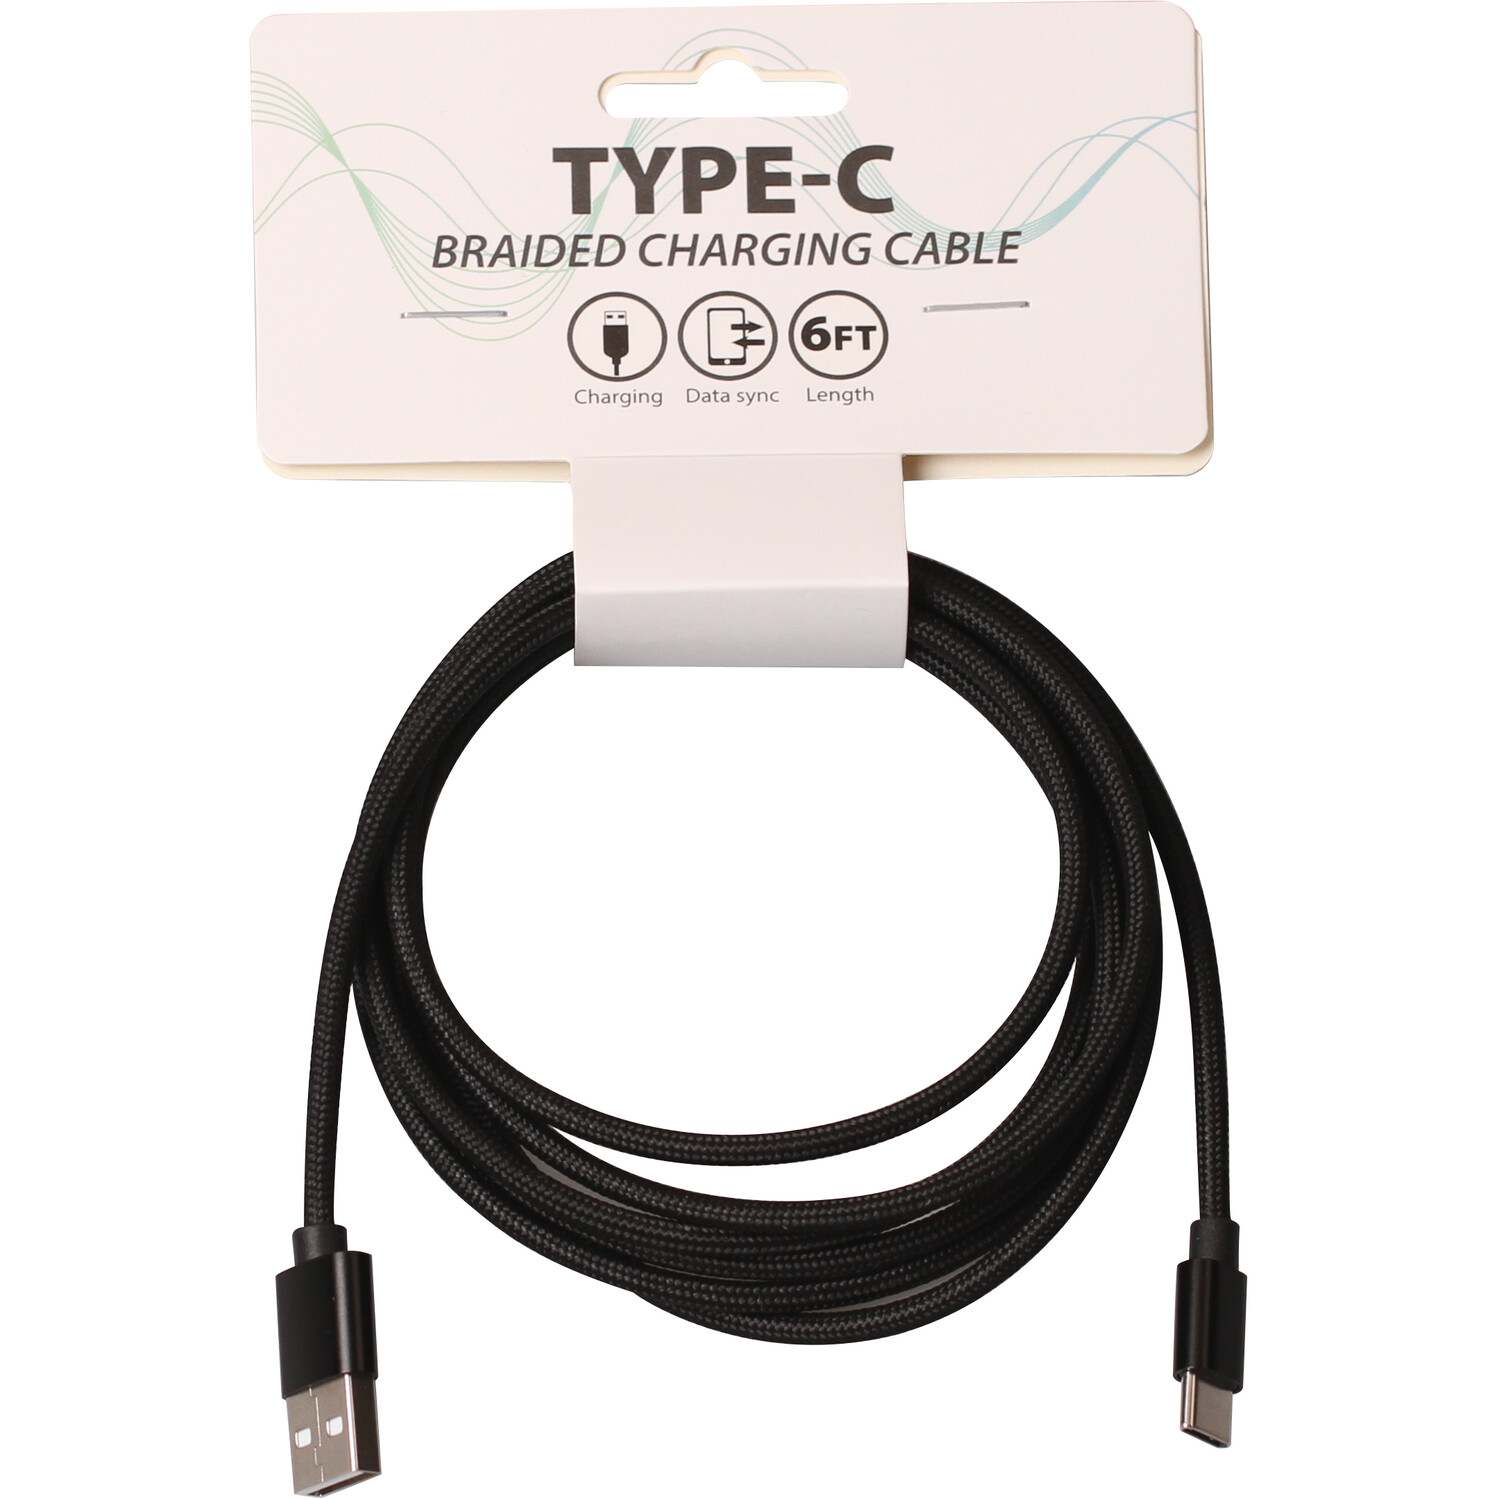 Type-C Braided Charging Cable Image